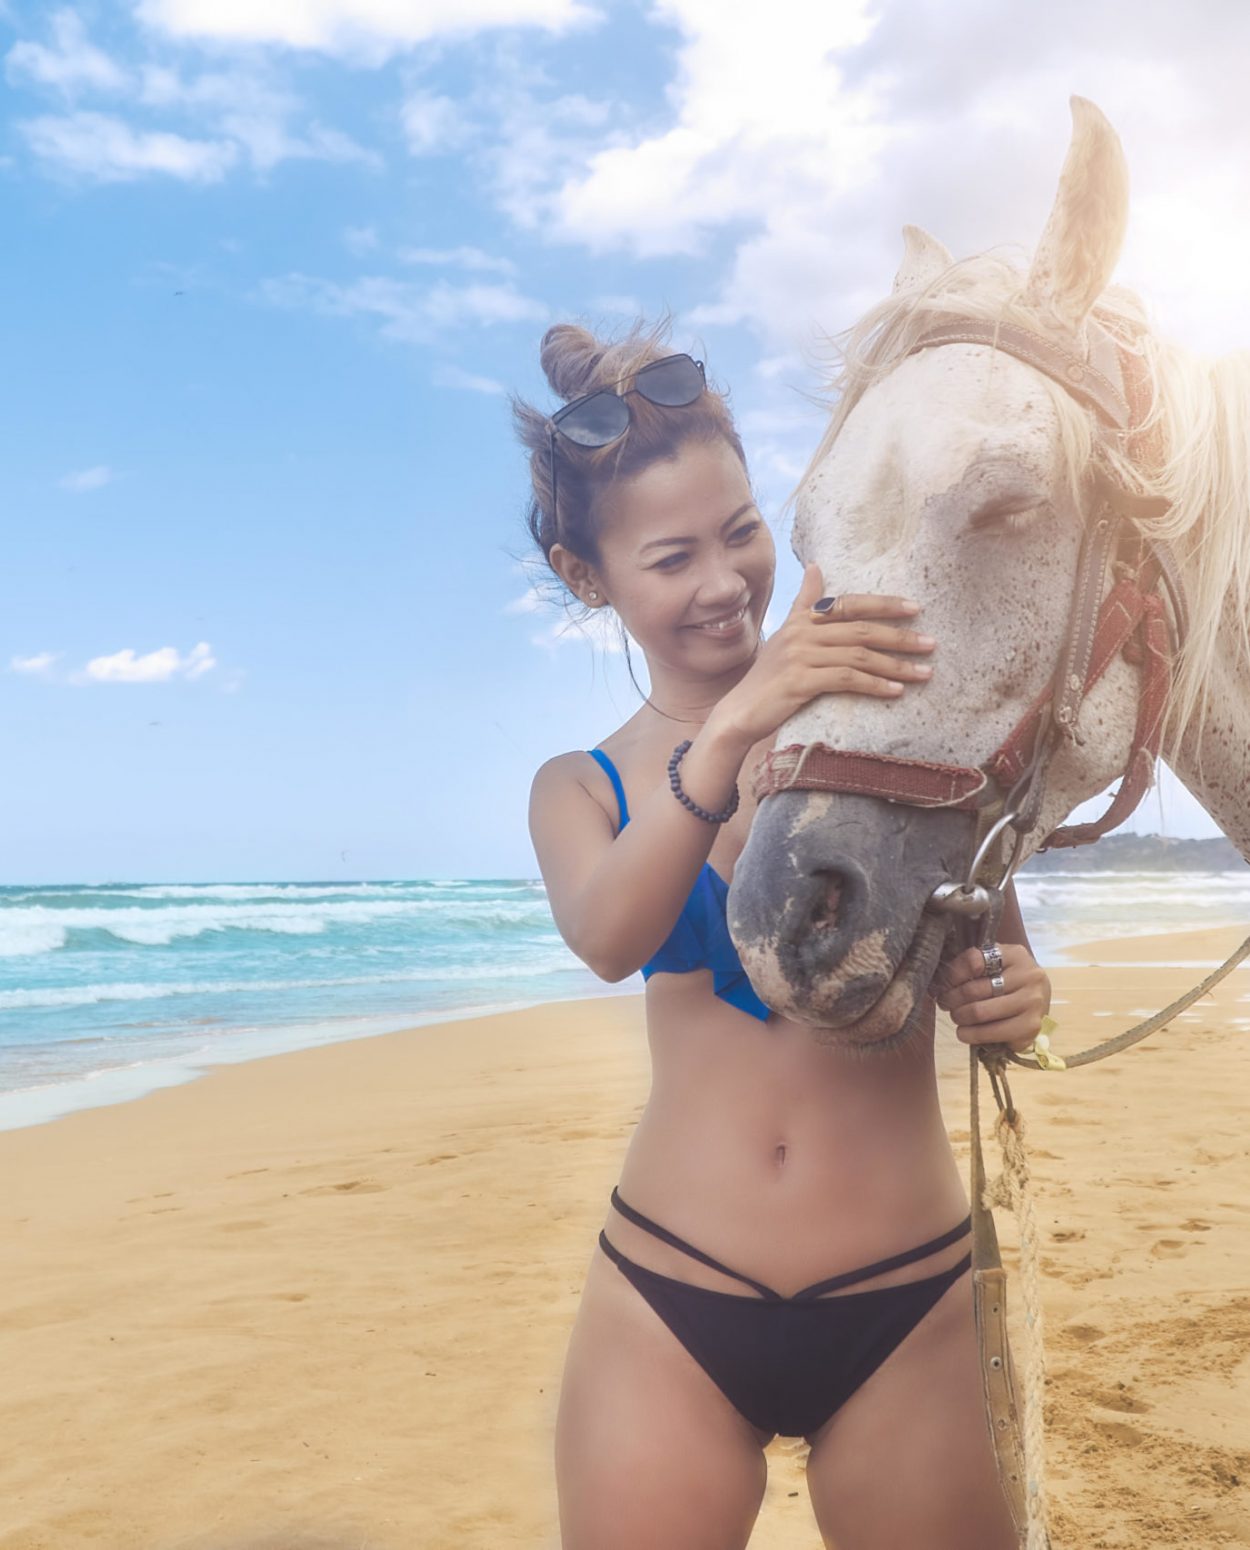 Woman stroking a white horse on the beach